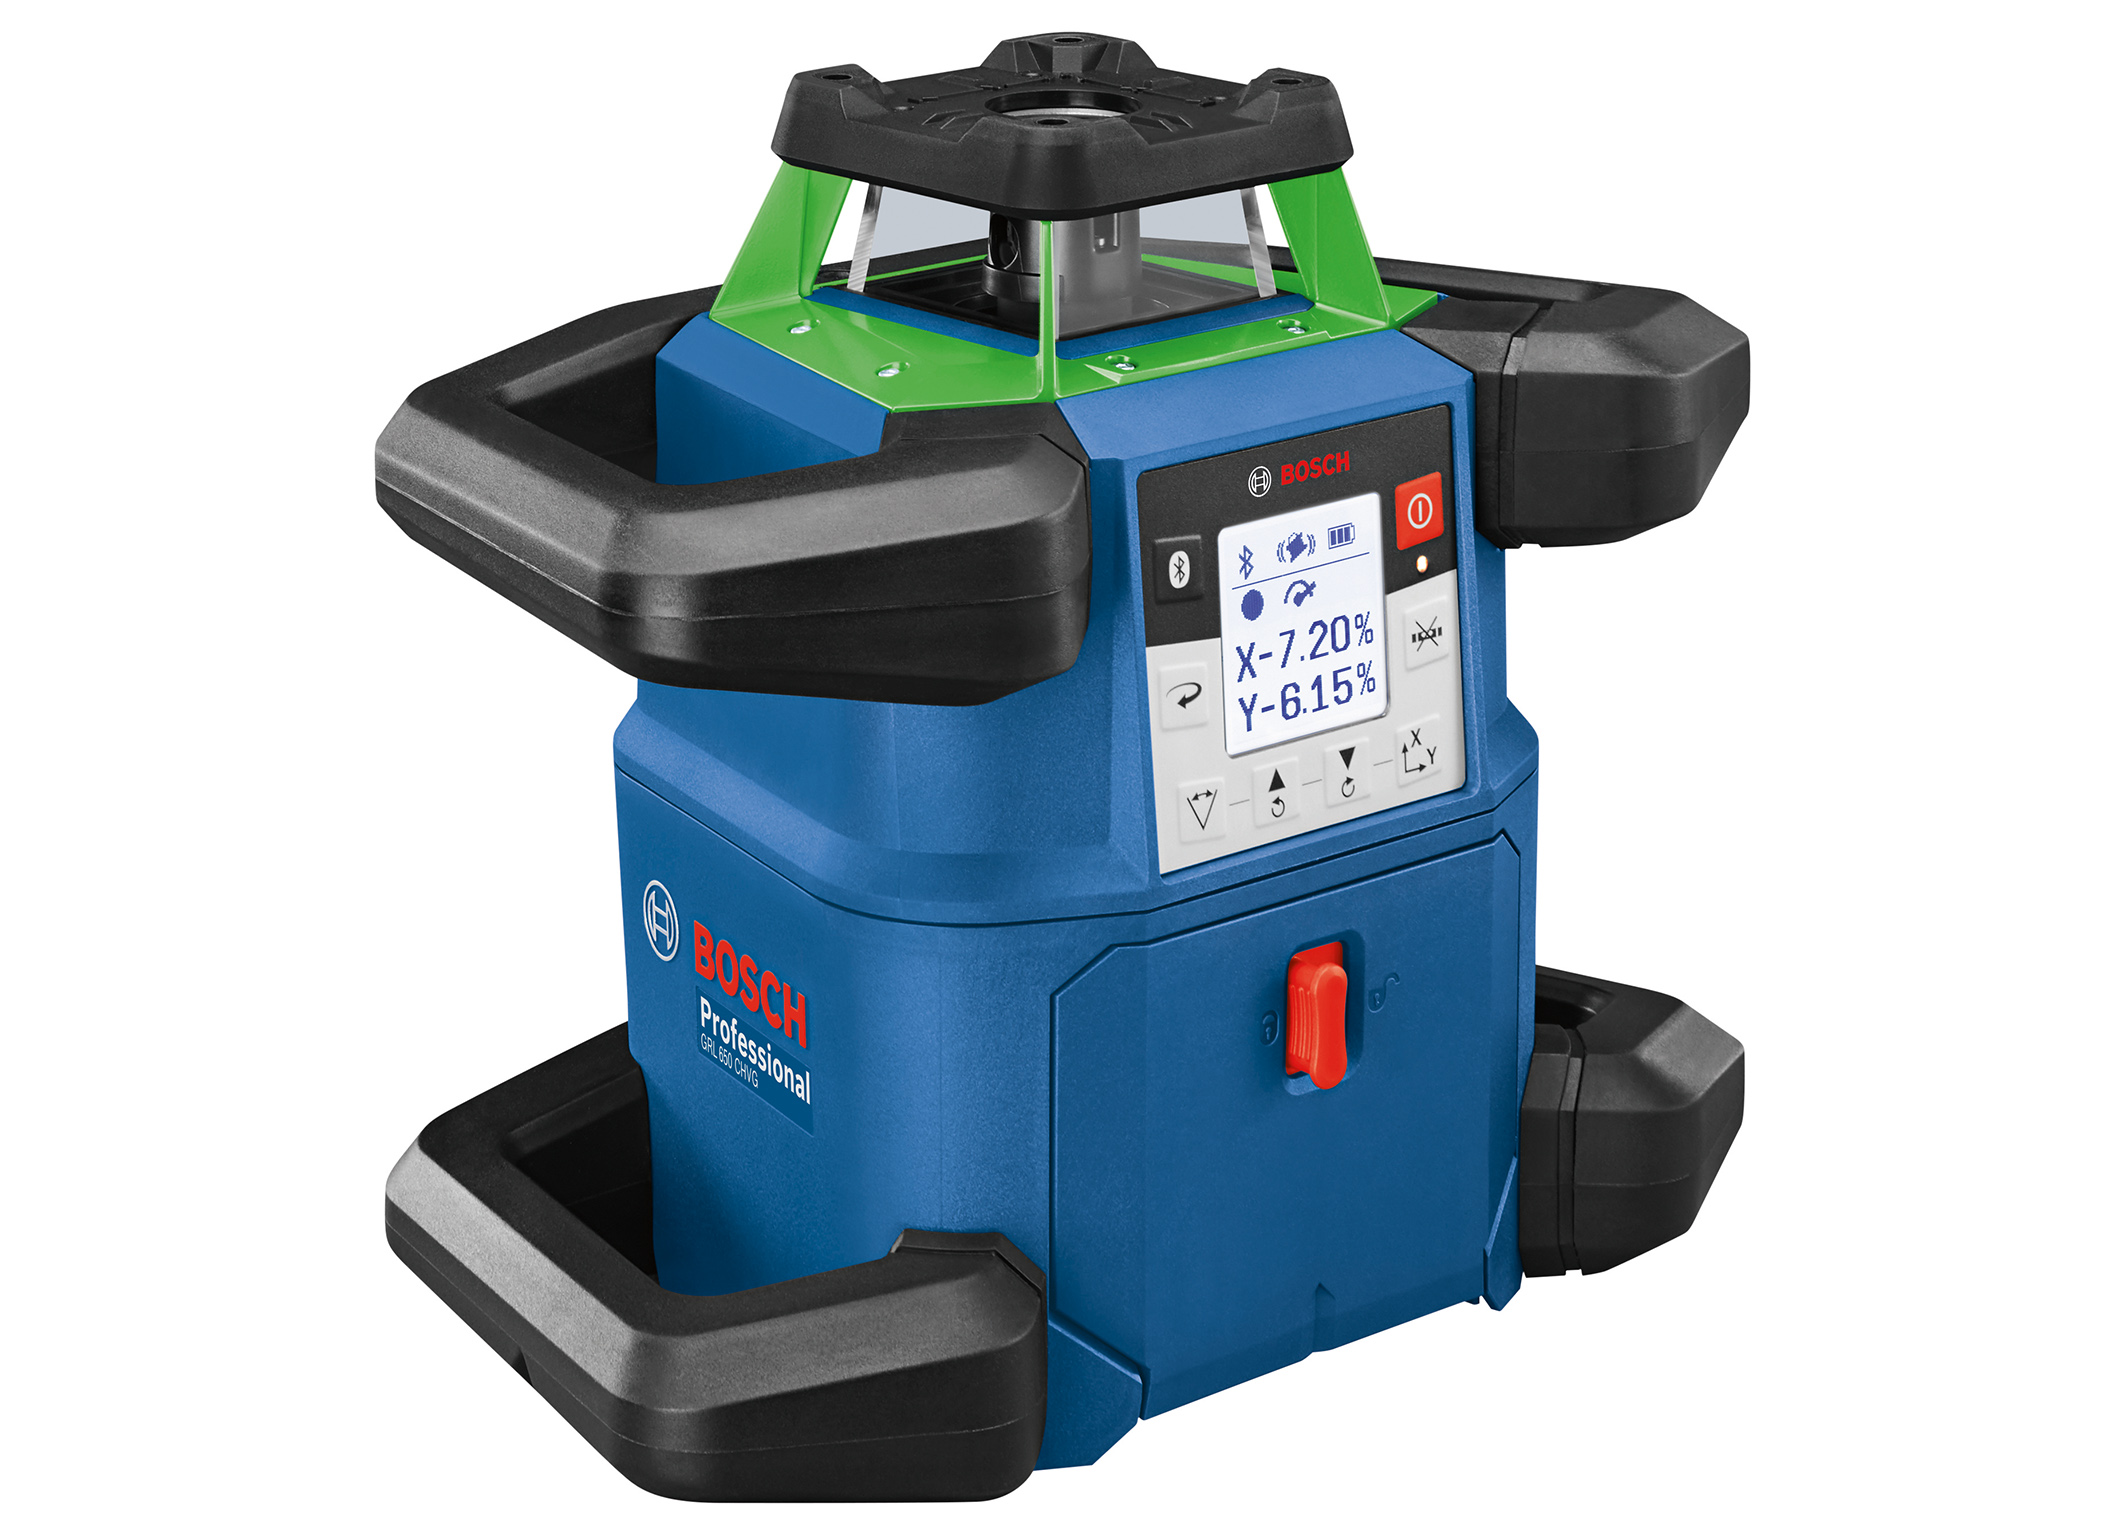 Robust design combined with green laser: Rotary laser GRL 650 CHVG Professional from Bosch for professionals